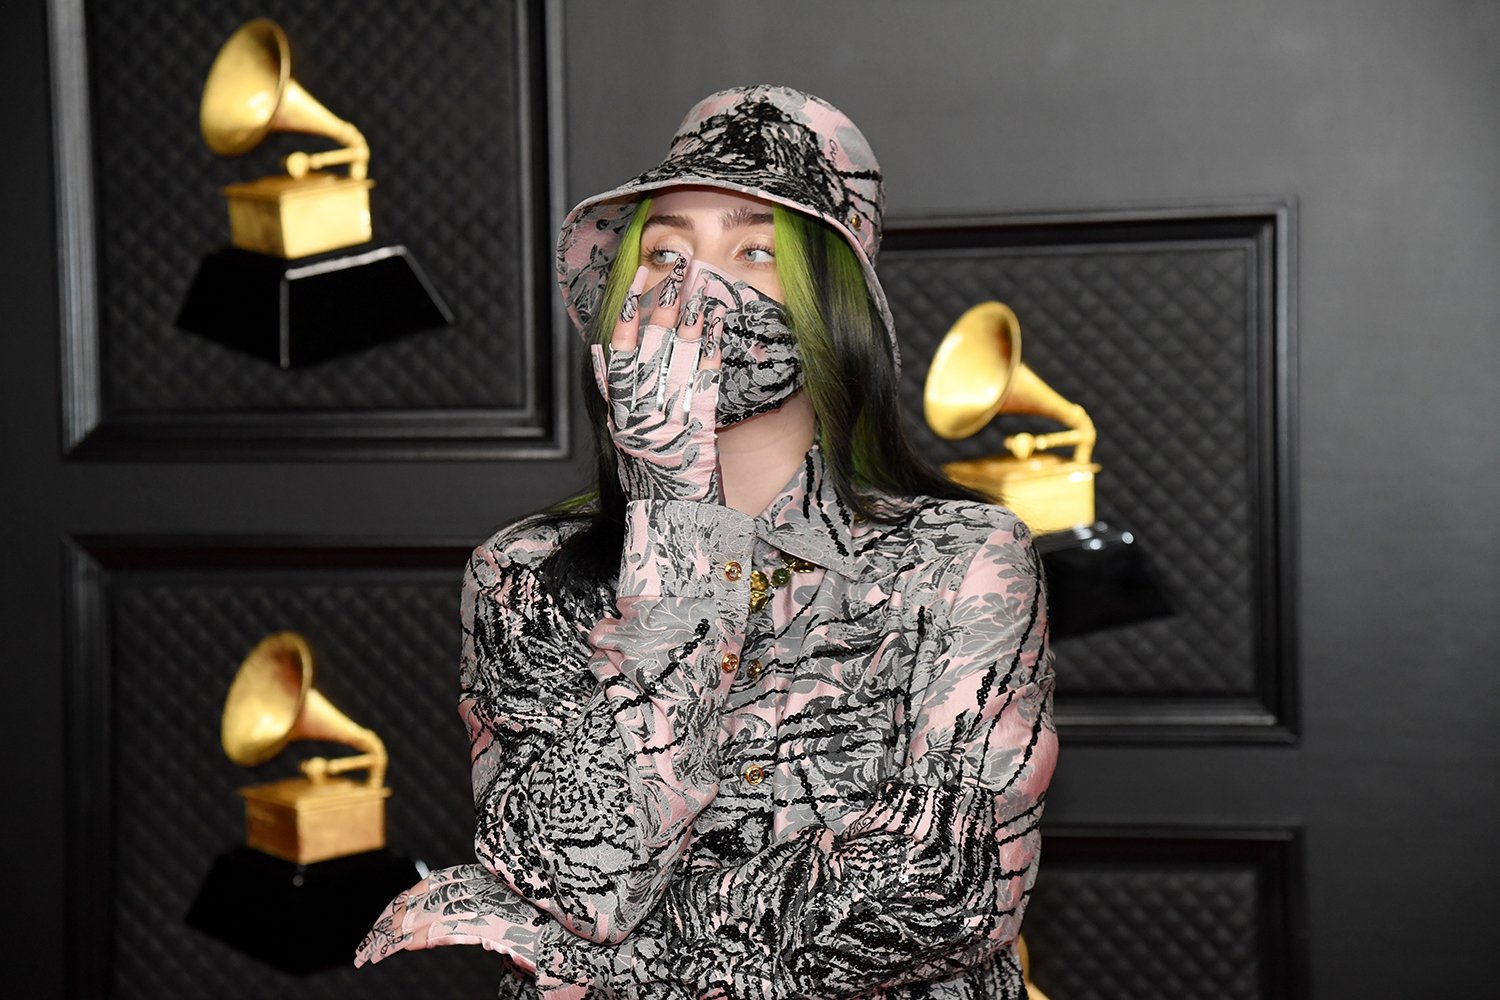 Billie Eilish wears a face mask and covers her mouth with her hand at the 63rd Annual Grammy Awards